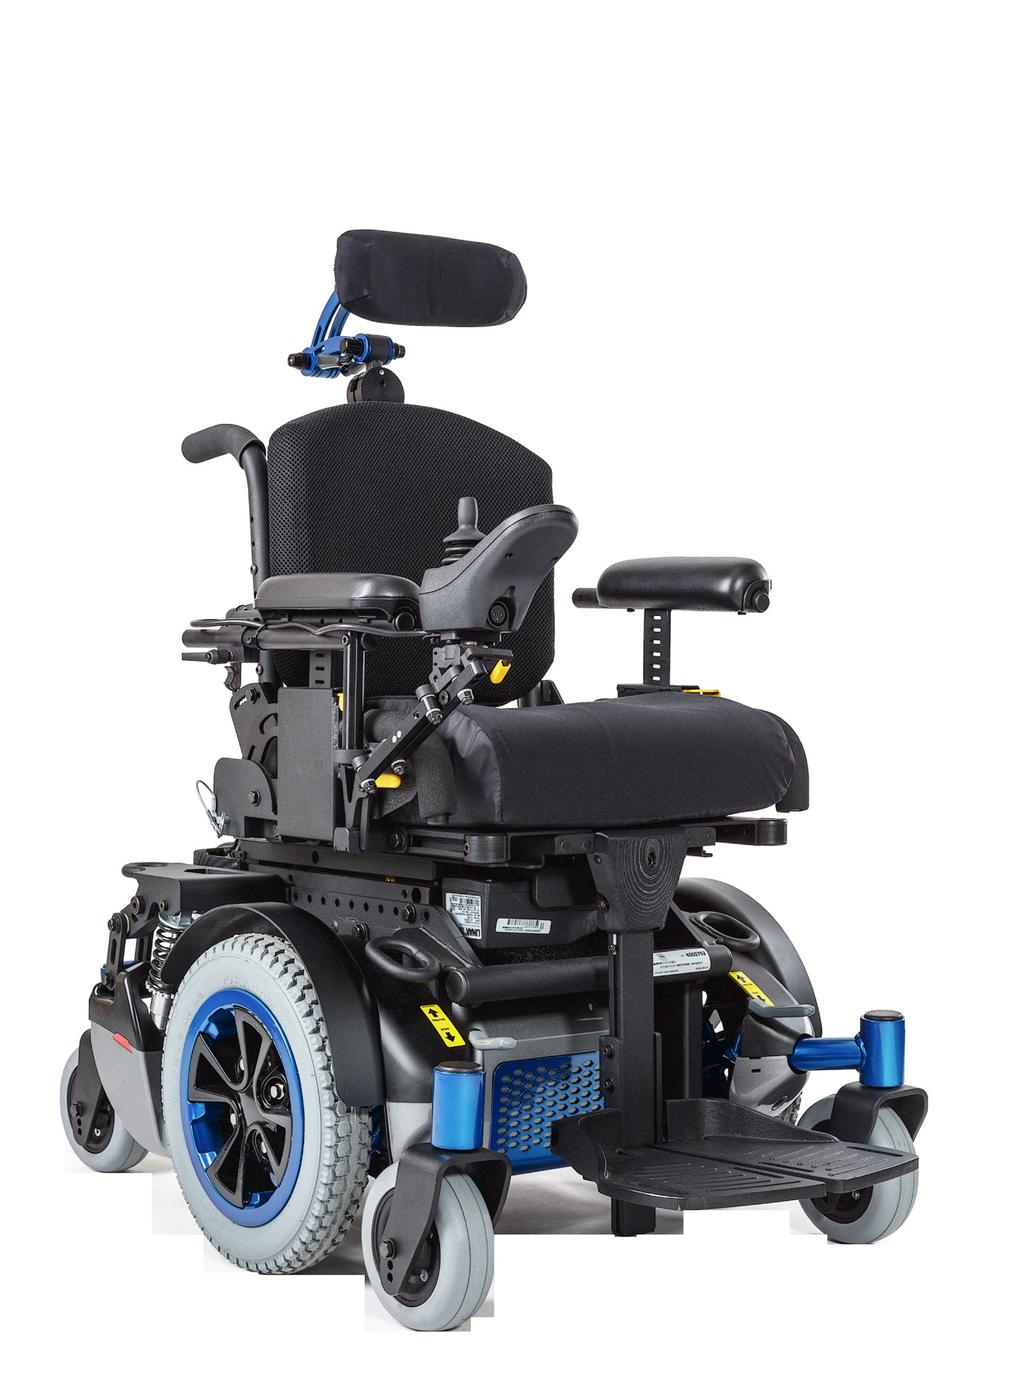 This children s electric wheelchairs performance is as good outdoors as it is indoors, the unique GC3 interactive suspension delivers a smooth, safe and stable ride even when travelling over slopes